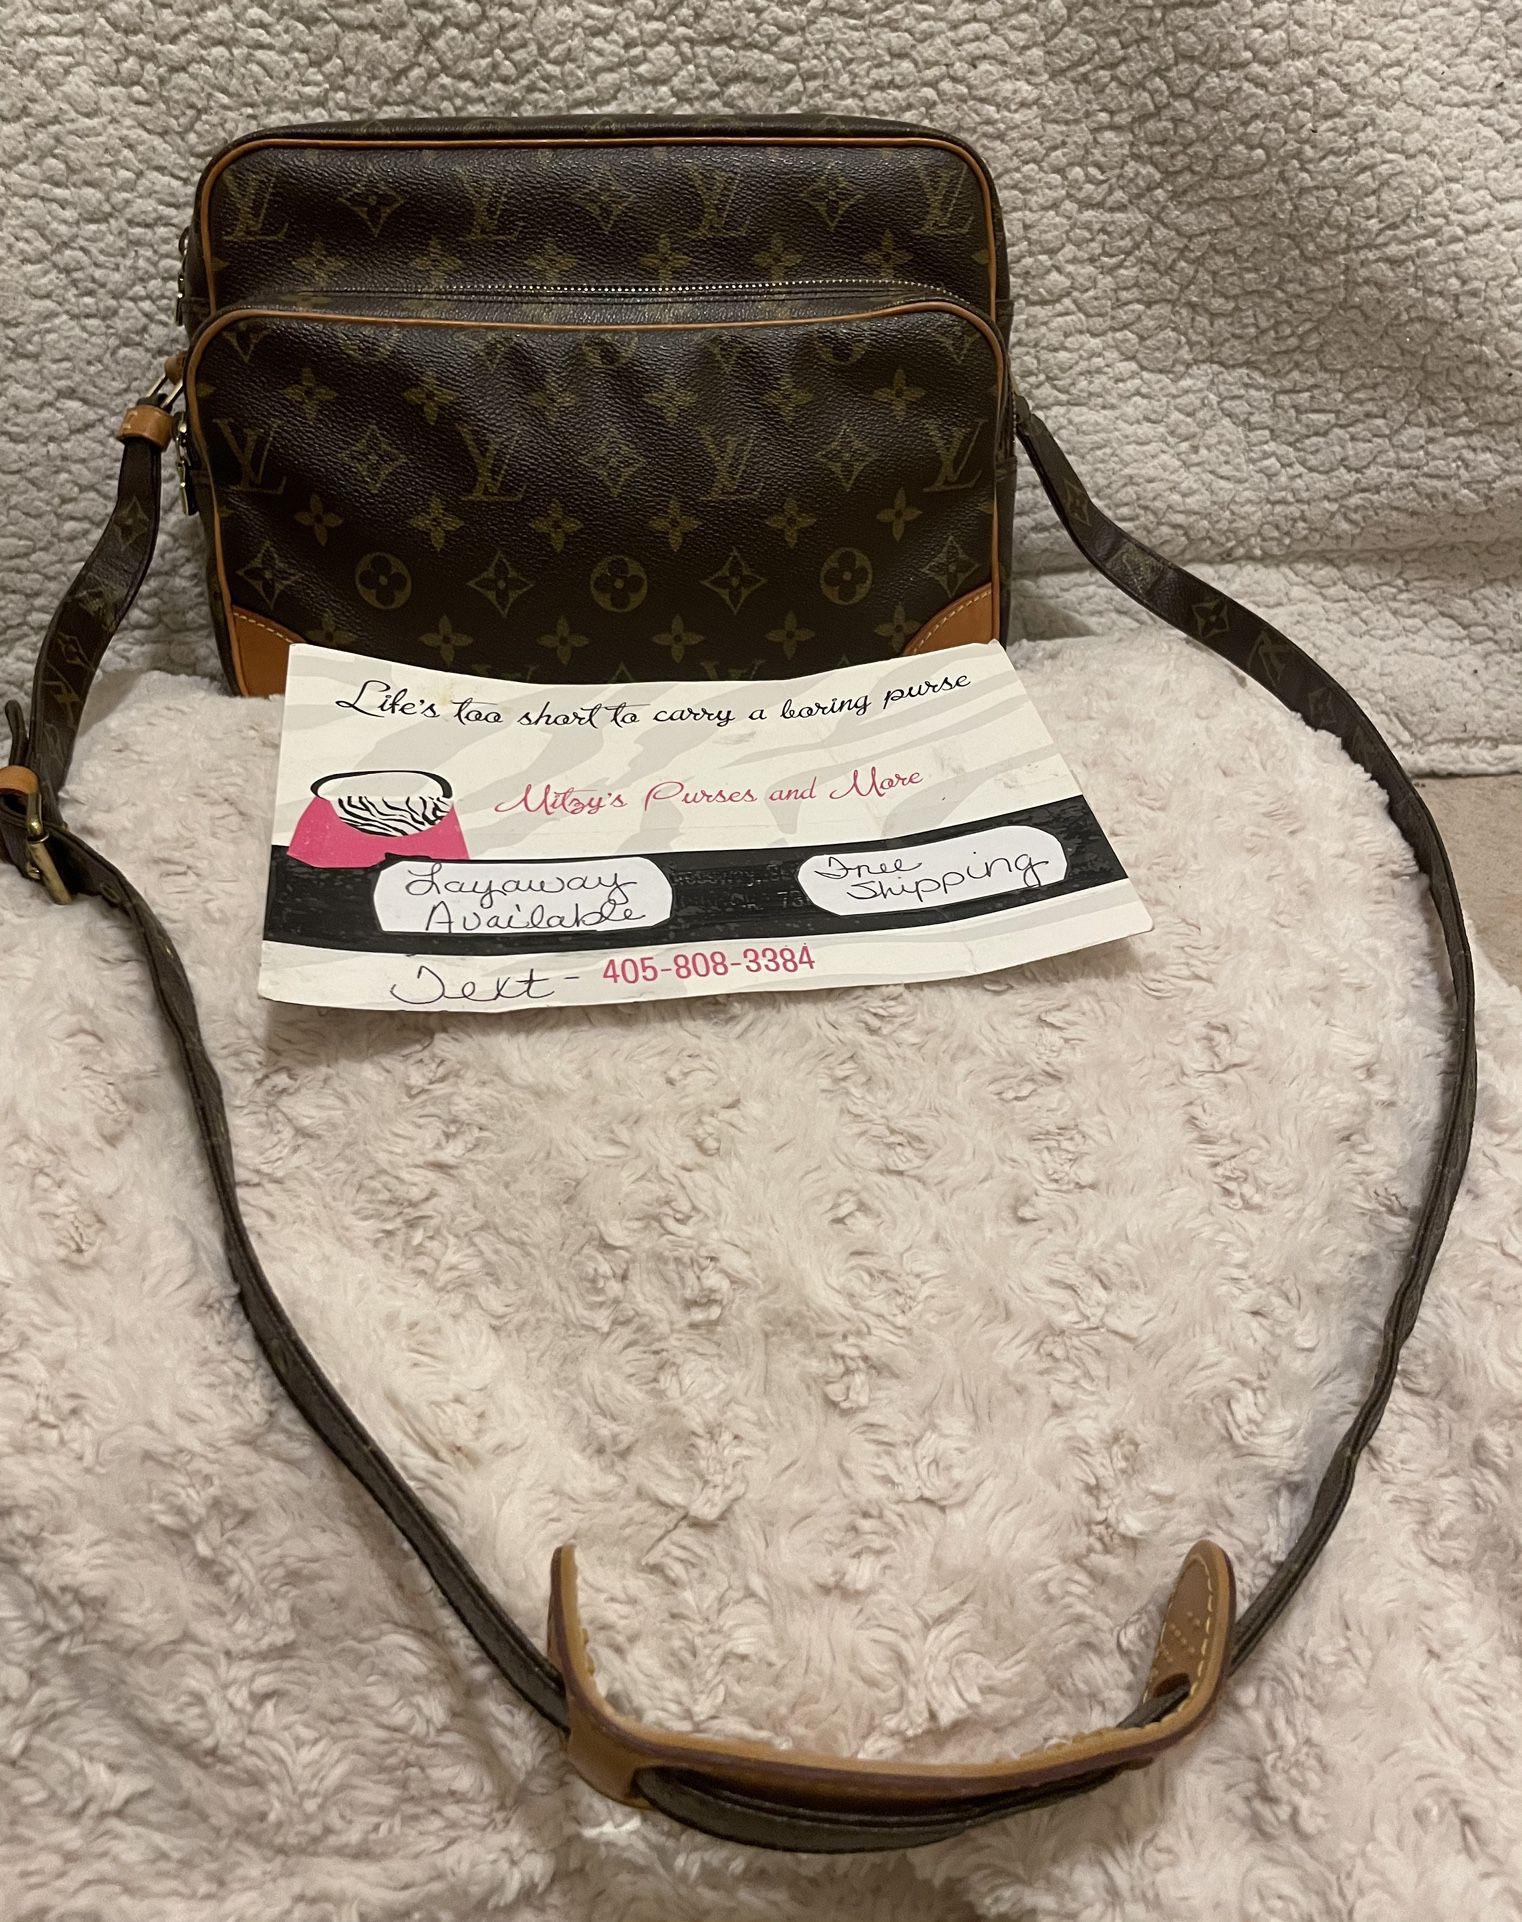 Authentic 2002 Louis Vuitton Unisex Bag Being Listed By Mitzys Purses and MoreBeing Li